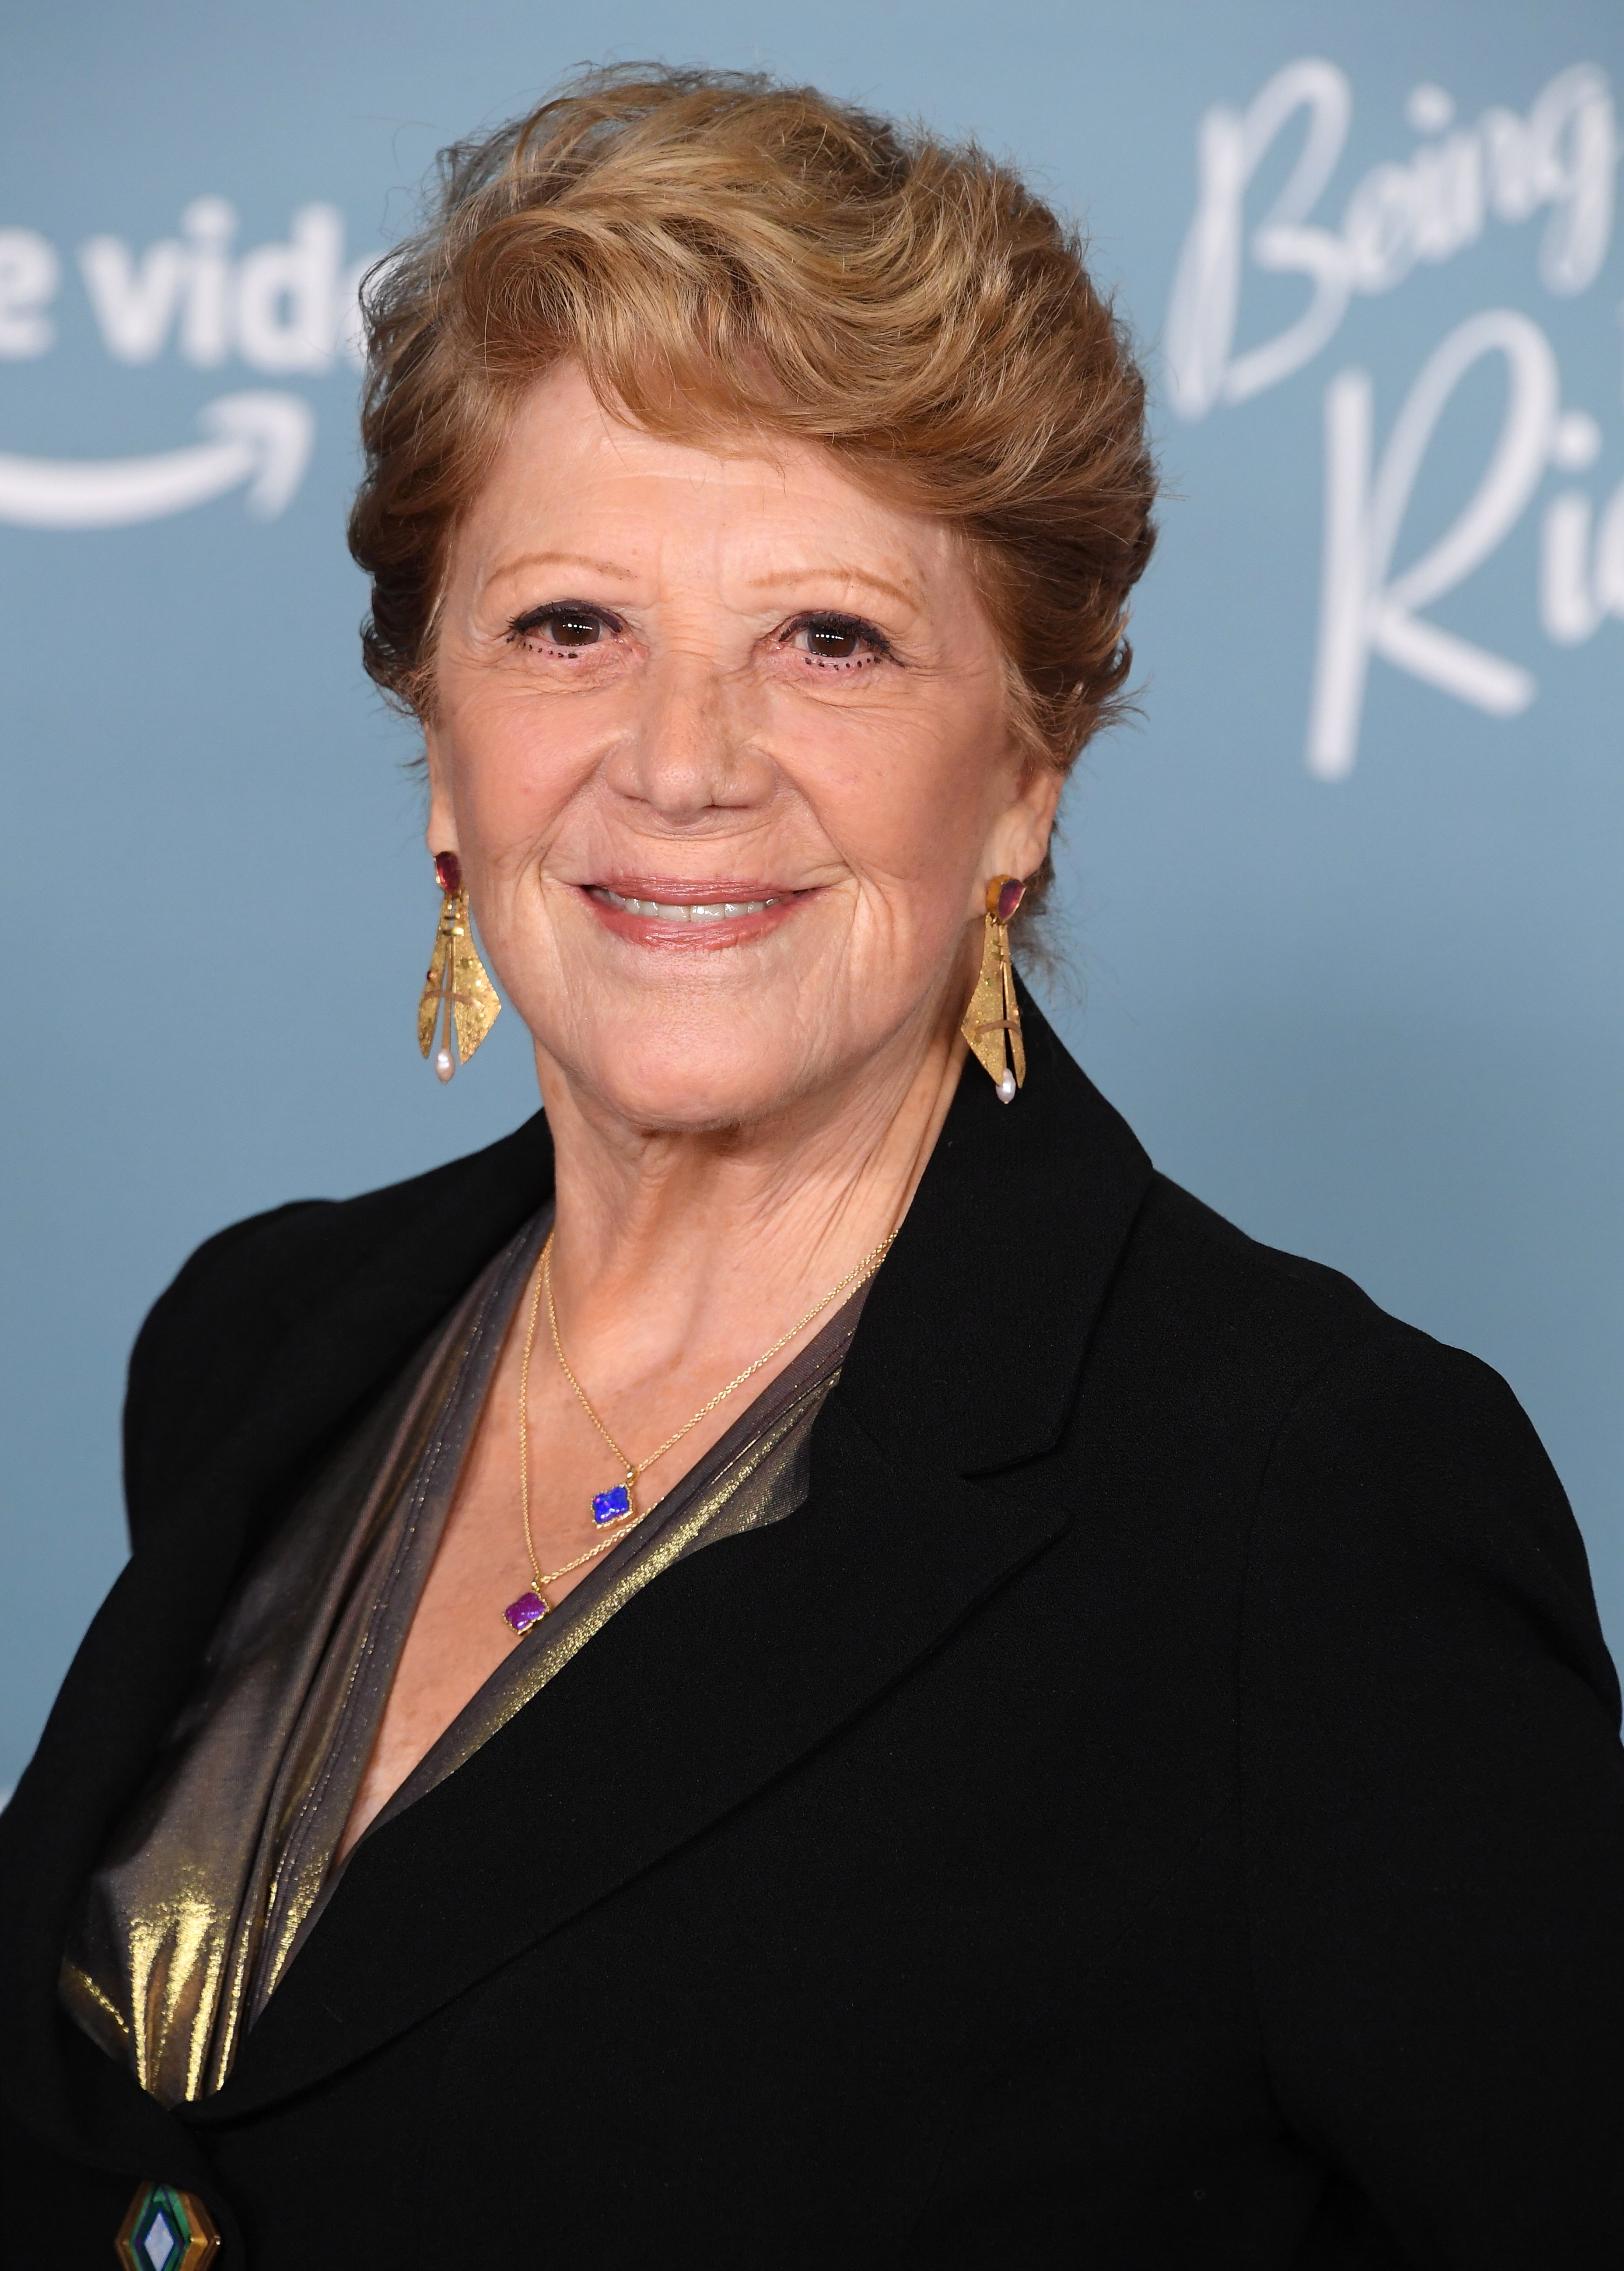 Linda Lavin arrives at the Los Angeles Premiere Of Amazon Studios' "Being The Ricardos" at Academy Museum of Motion Pictures on December 06, 2021, in Los Angeles, California. | Source: Getty Images